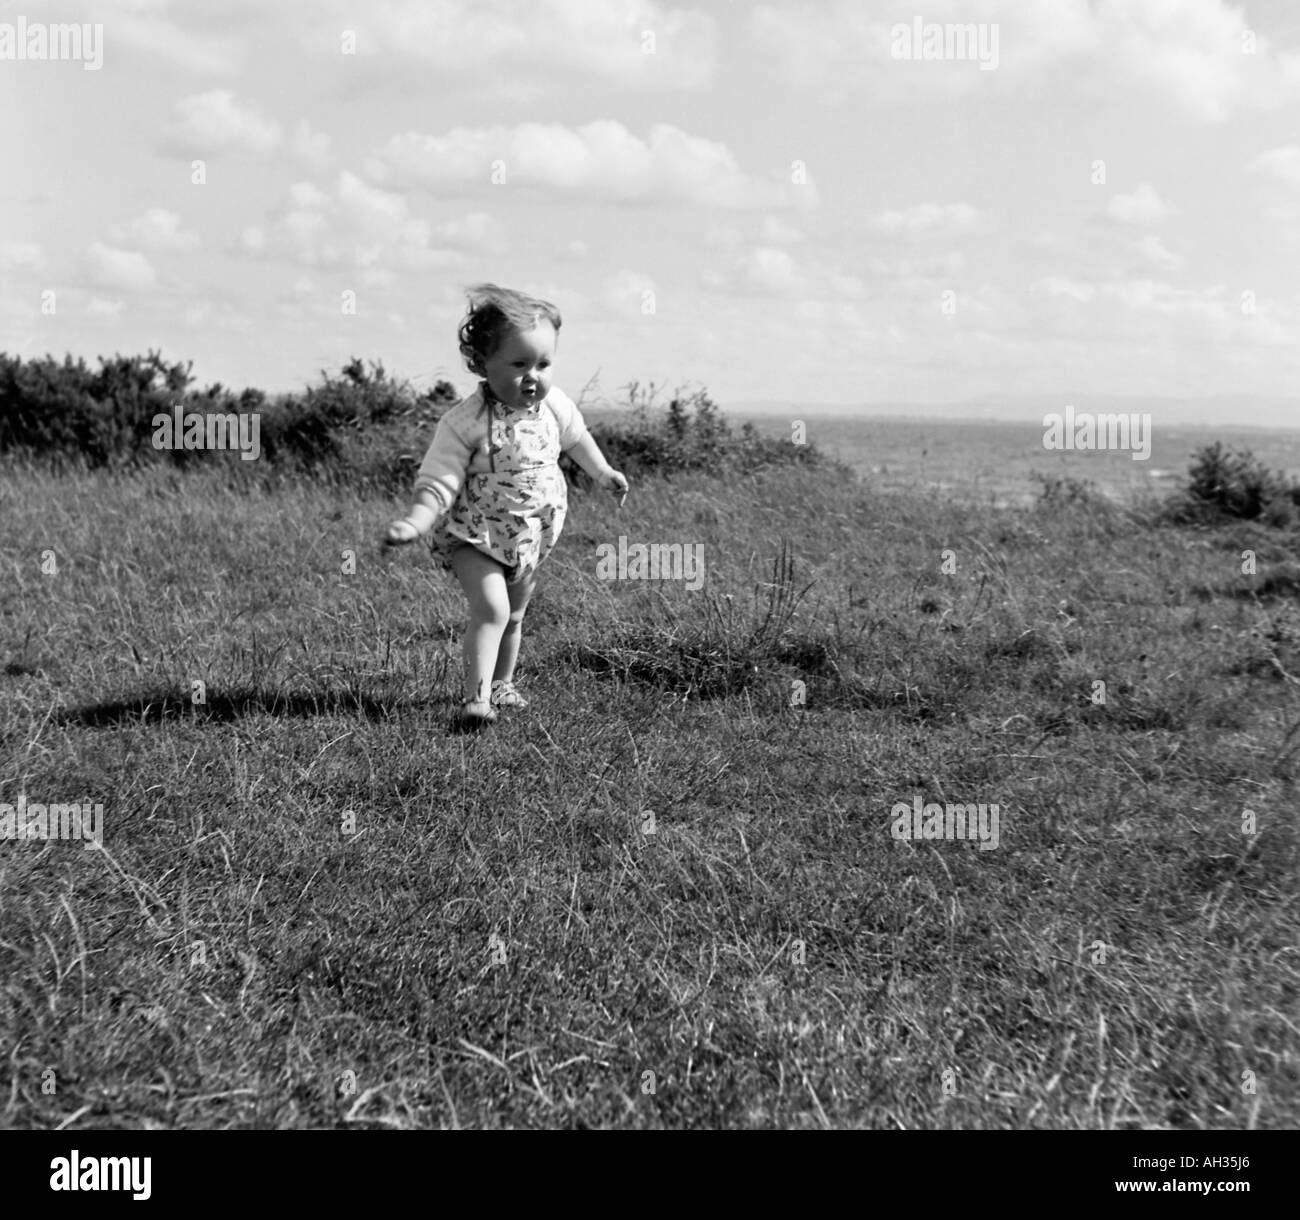 OLD VINTAGE FAMILY SNAPSHOT PHOTOGRAPH OF LITTLE GIRL RUNNING IN GRASS FIELD Stock Photo